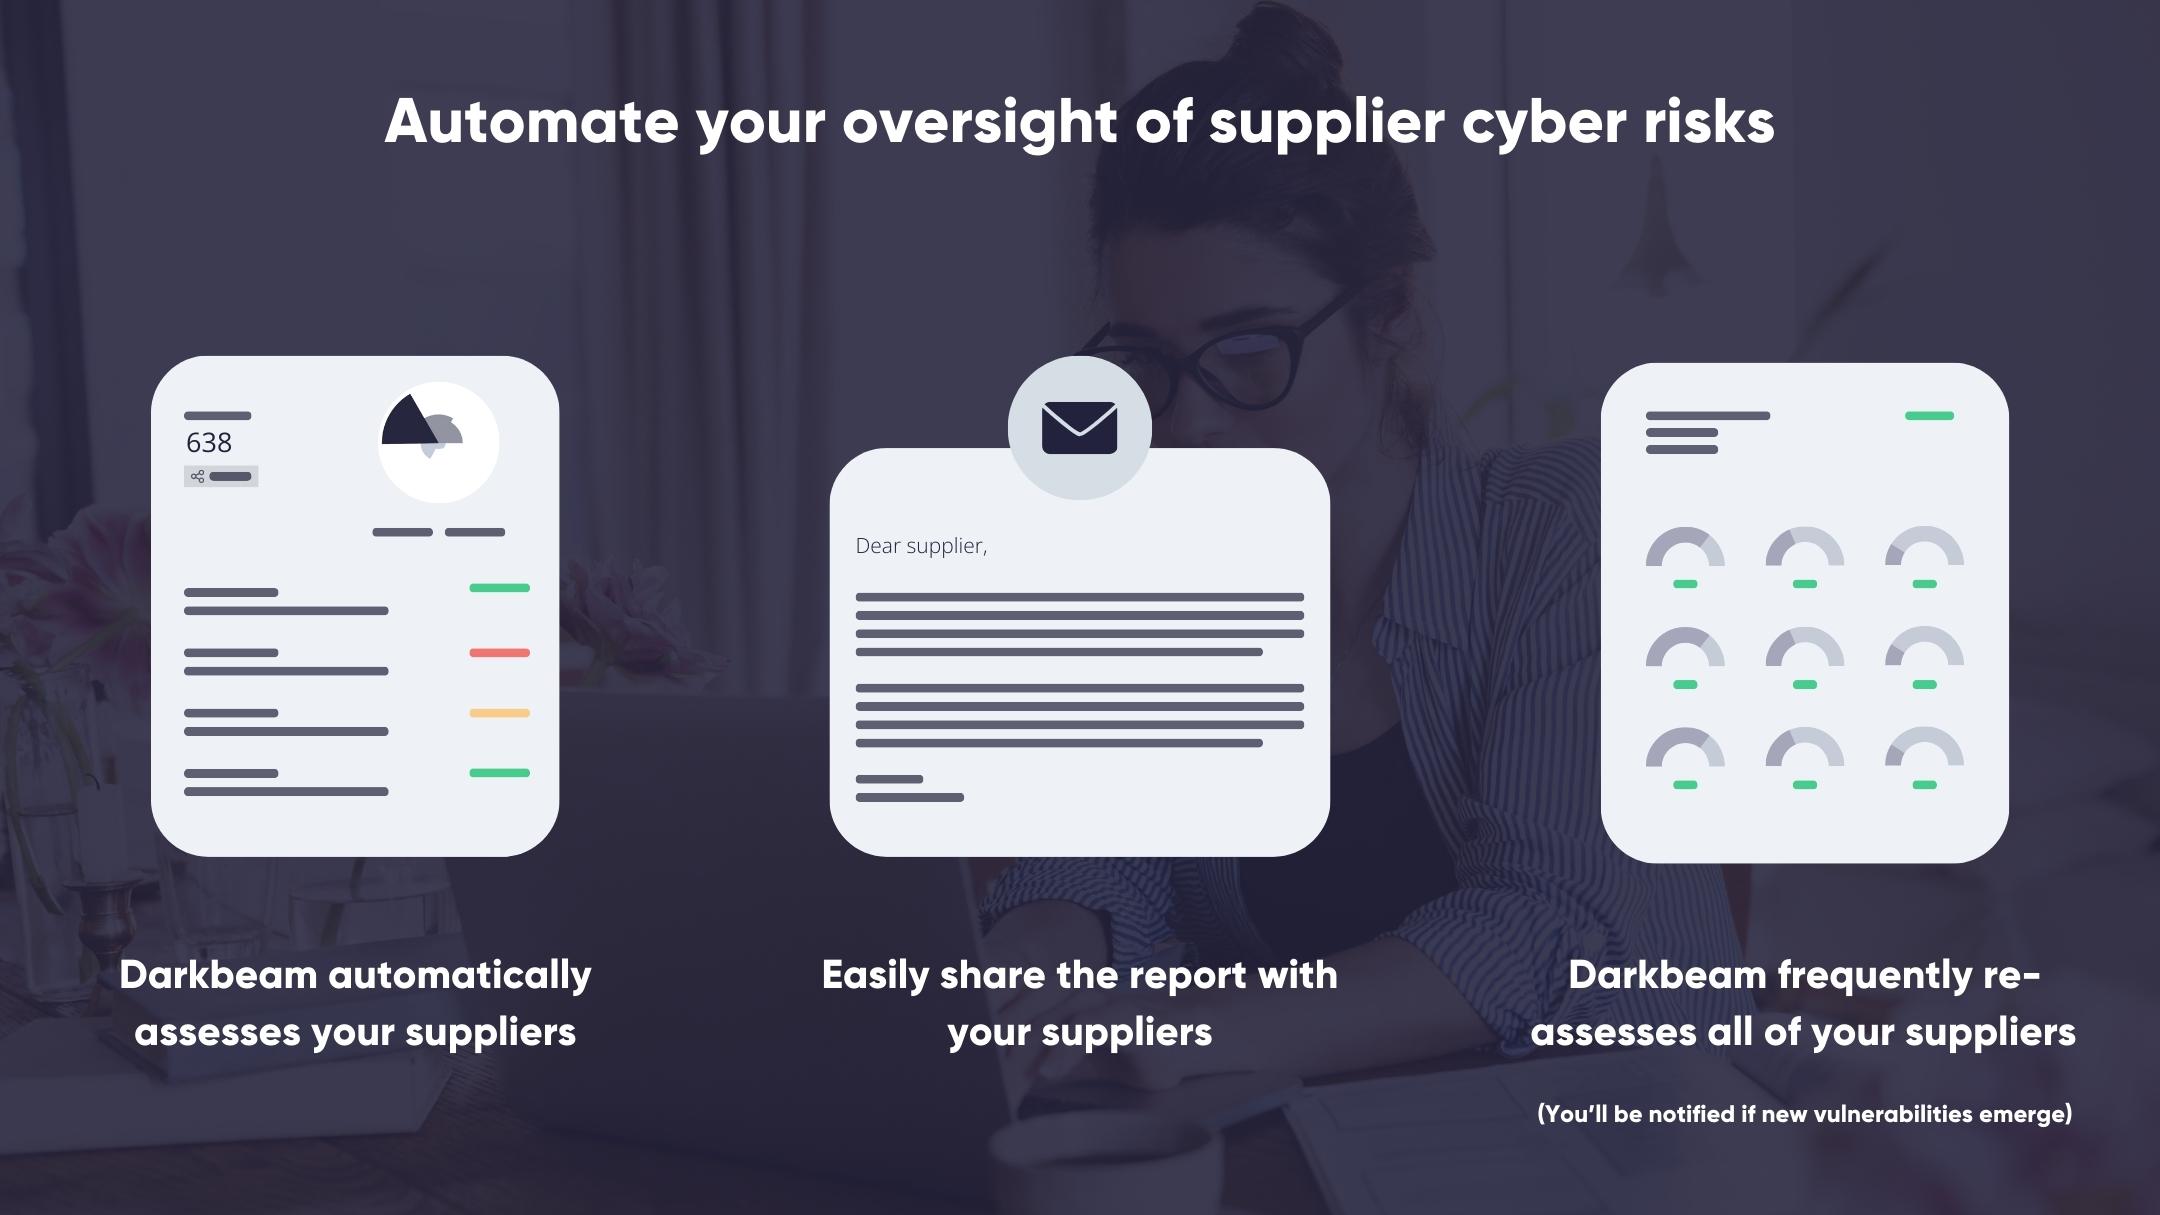 A demonstration of a Supplier Cyber Risk Management process, showing a report being automatically generated by Darkbeam then shared with the supplier, after which the supplier's cyber vulnerabilities are automatically monitored every week.